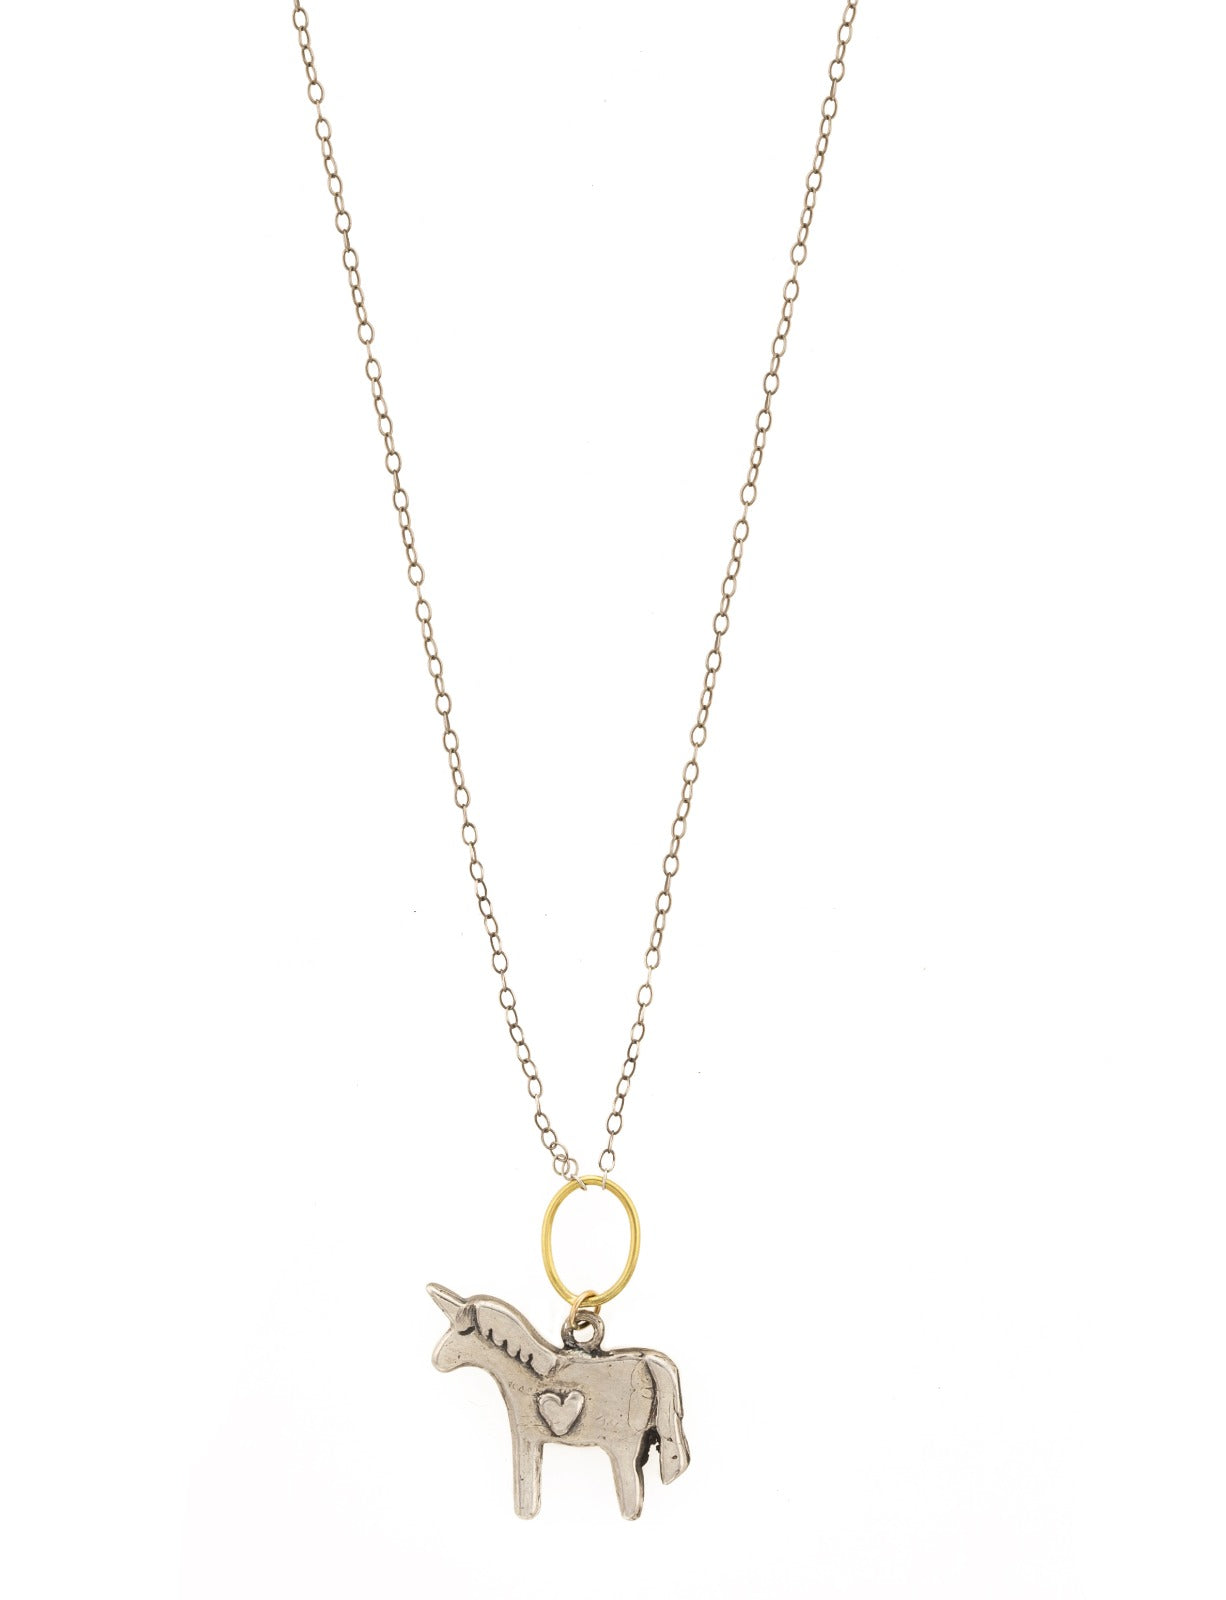 Believe in You Unicorn Necklace